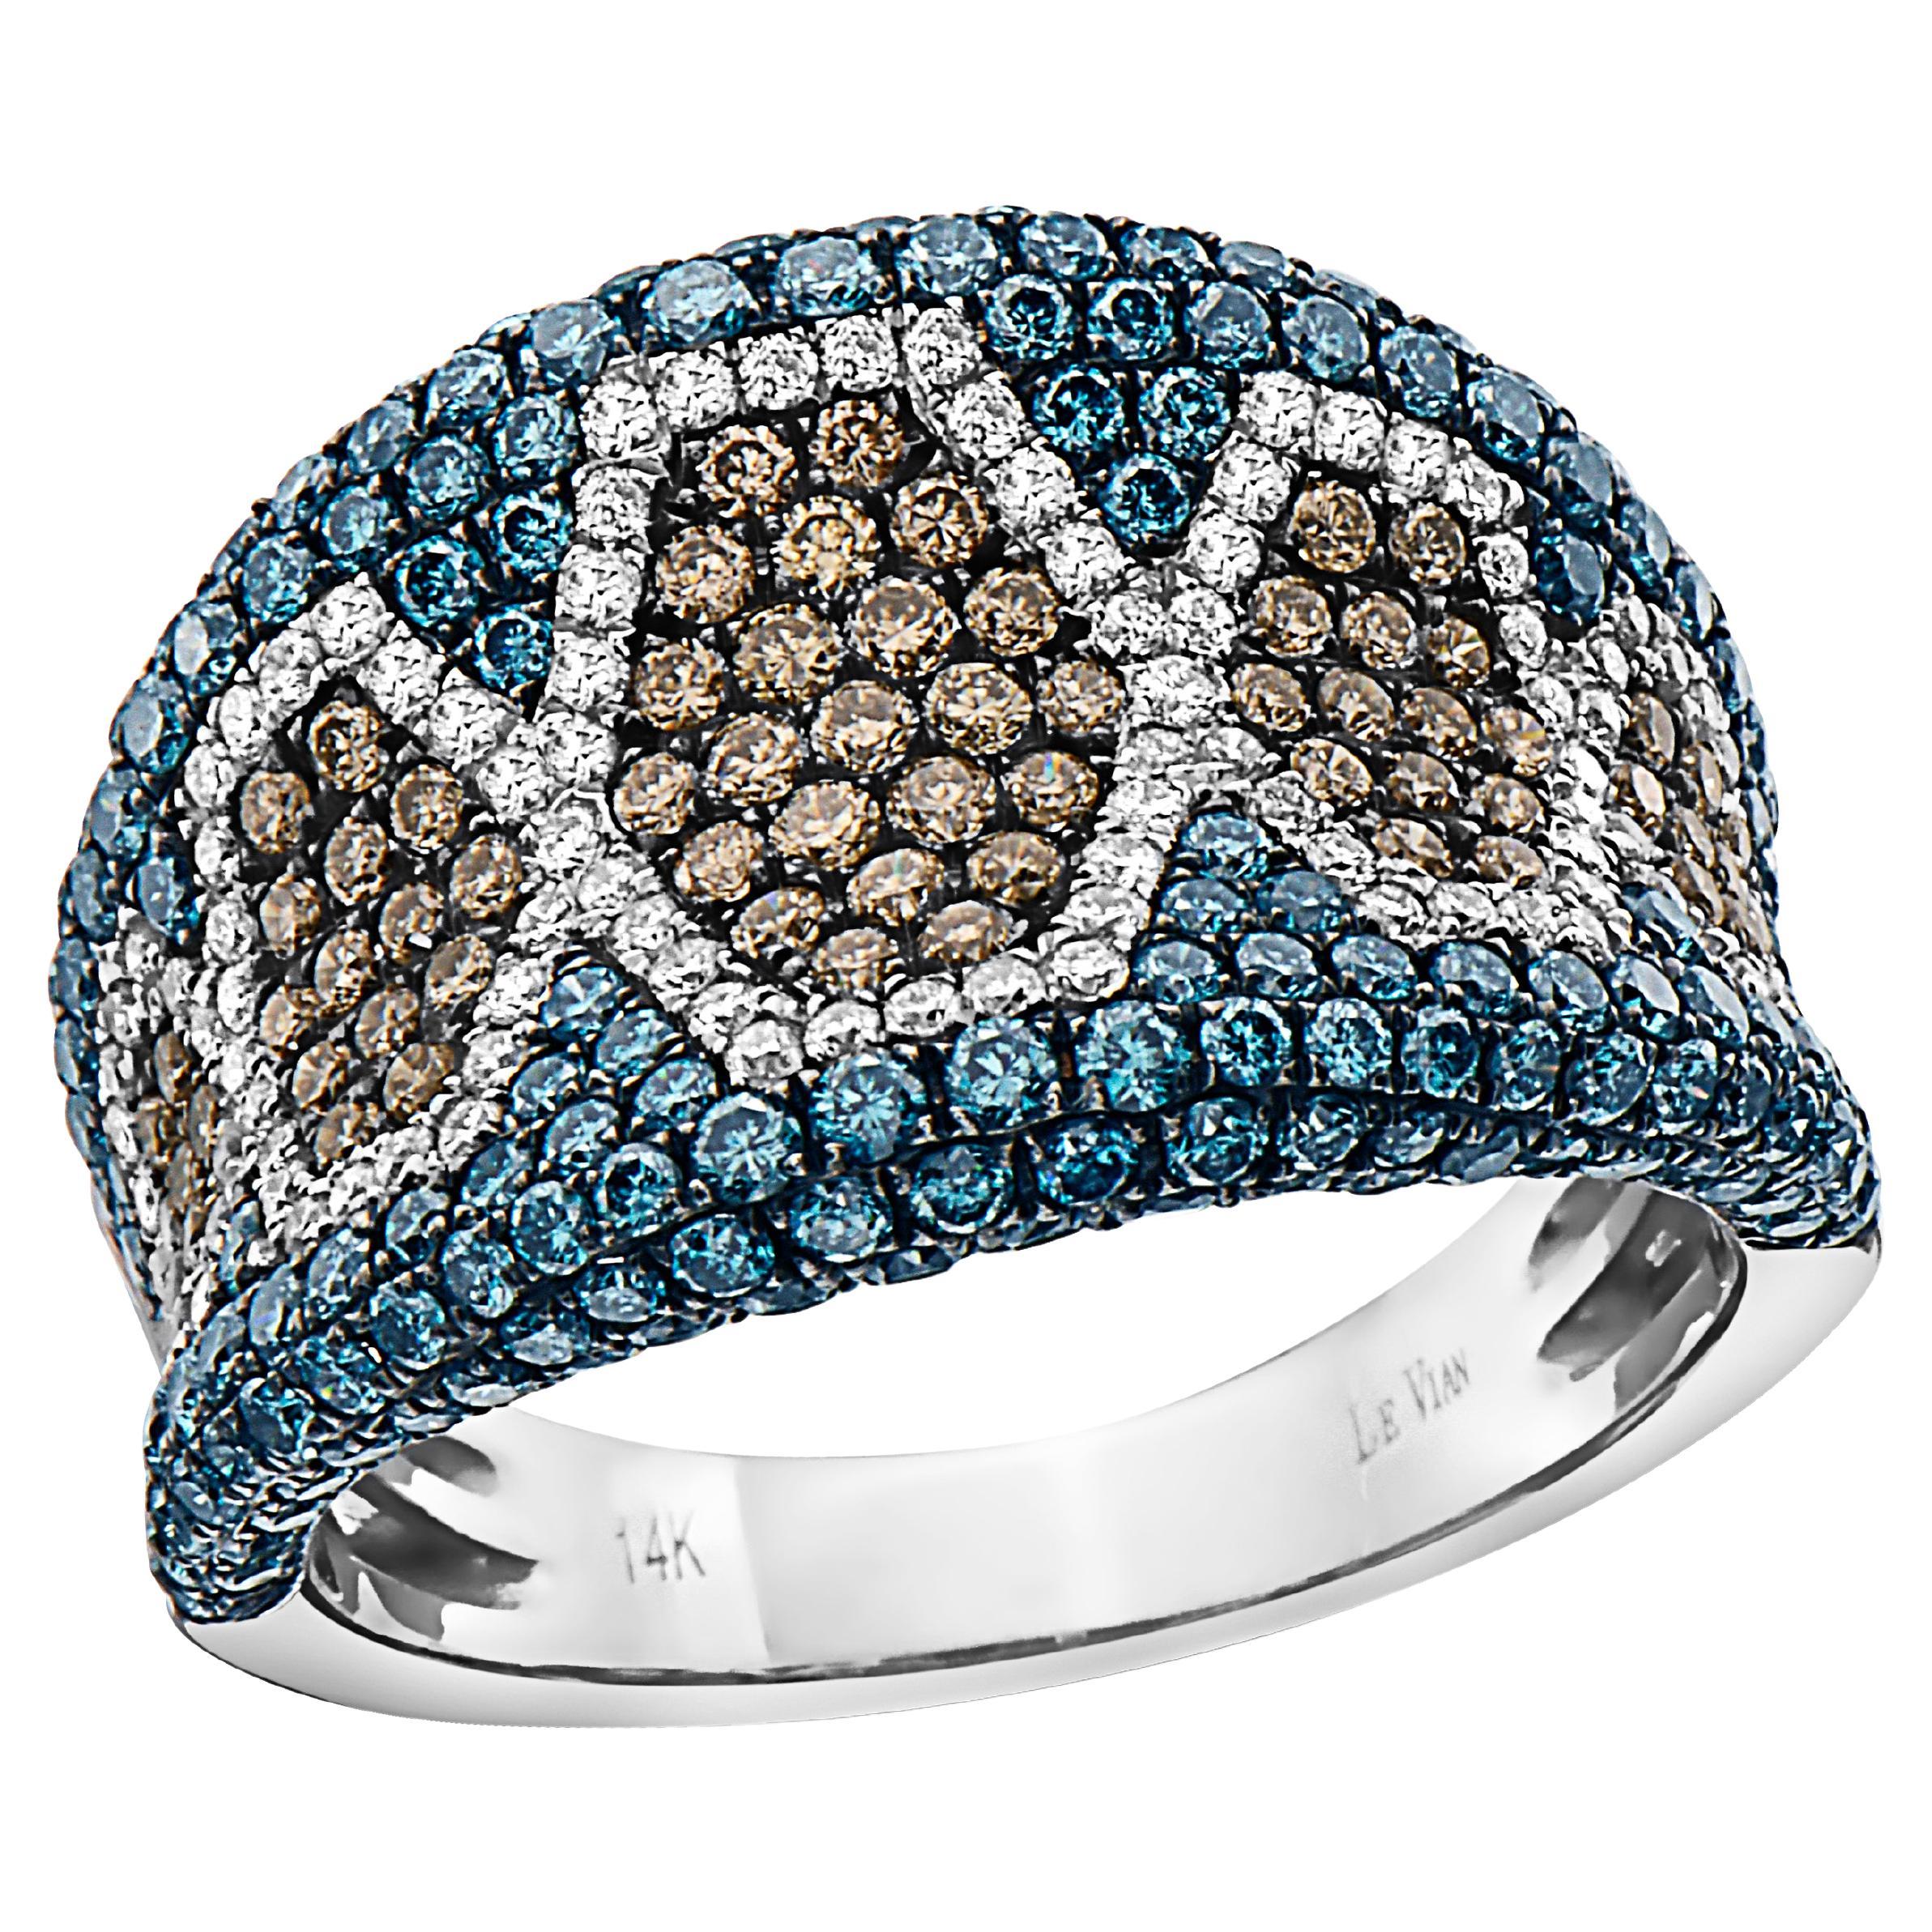 Levian Ring Chocolate Blue and White Diamonds Set in 14K White Gold